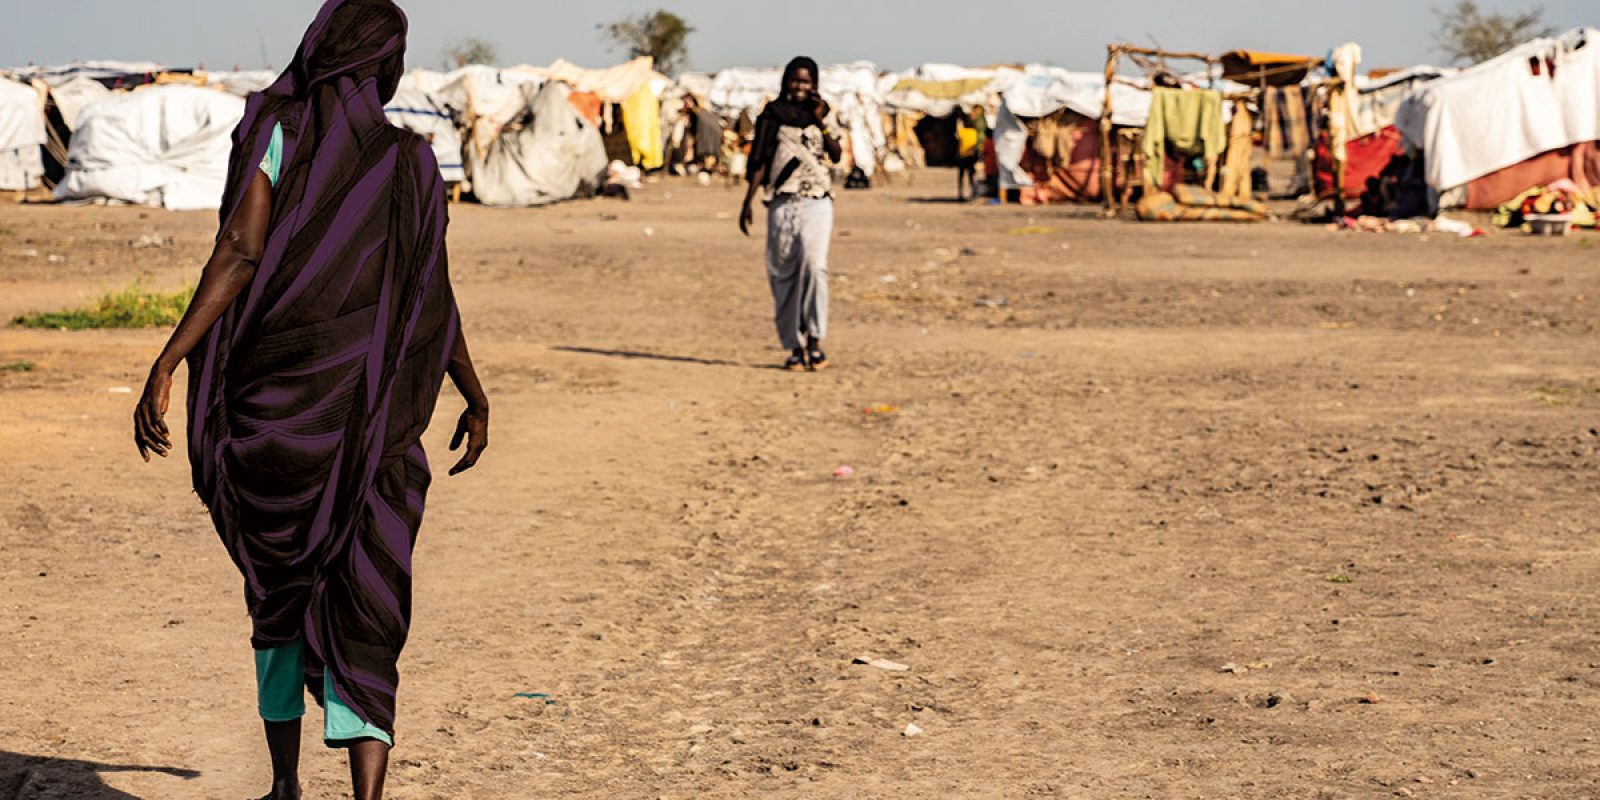 A woman walking in a camp in Renk, South Sudan, where people fleeing the conflict in Sudan are seeking refuge.